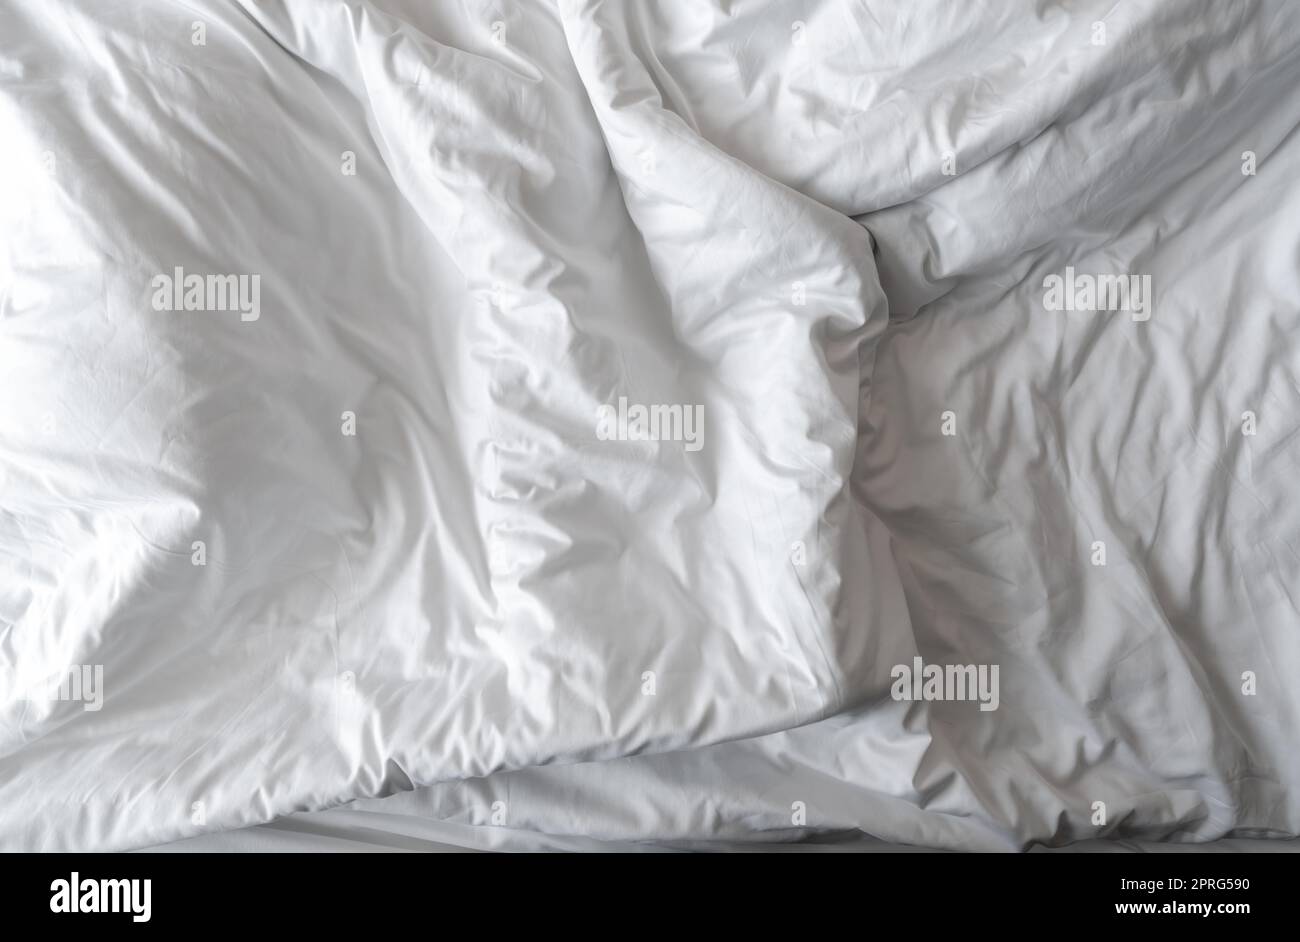 White linen blanket in hotel bedroom. Close-up detail of messy white blanket. Comfortable bed with soft white duvet. Sleep tight with good quality bedding household concept. Wrinkled white blanket. Stock Photo